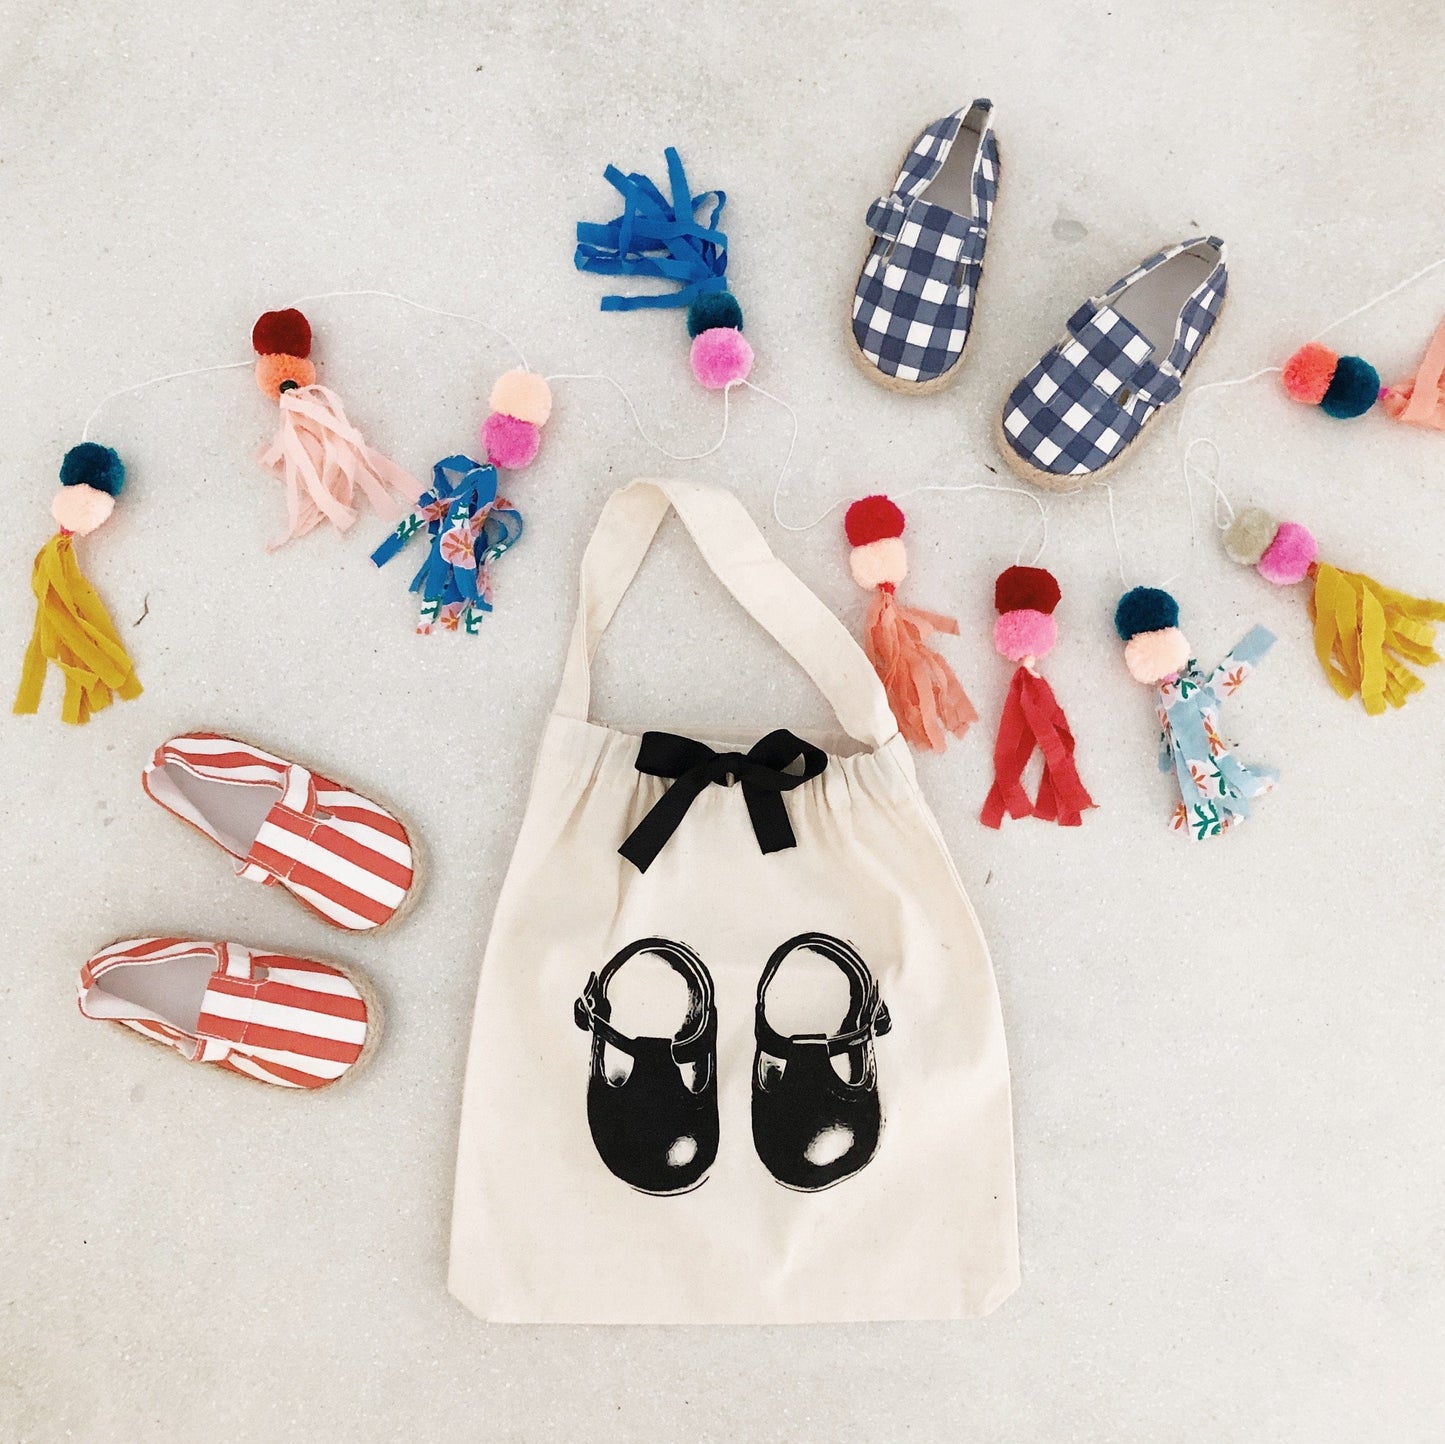 Baby shoes surrounding a white organizing bag that has a picture of baby shoes printed on the front. 